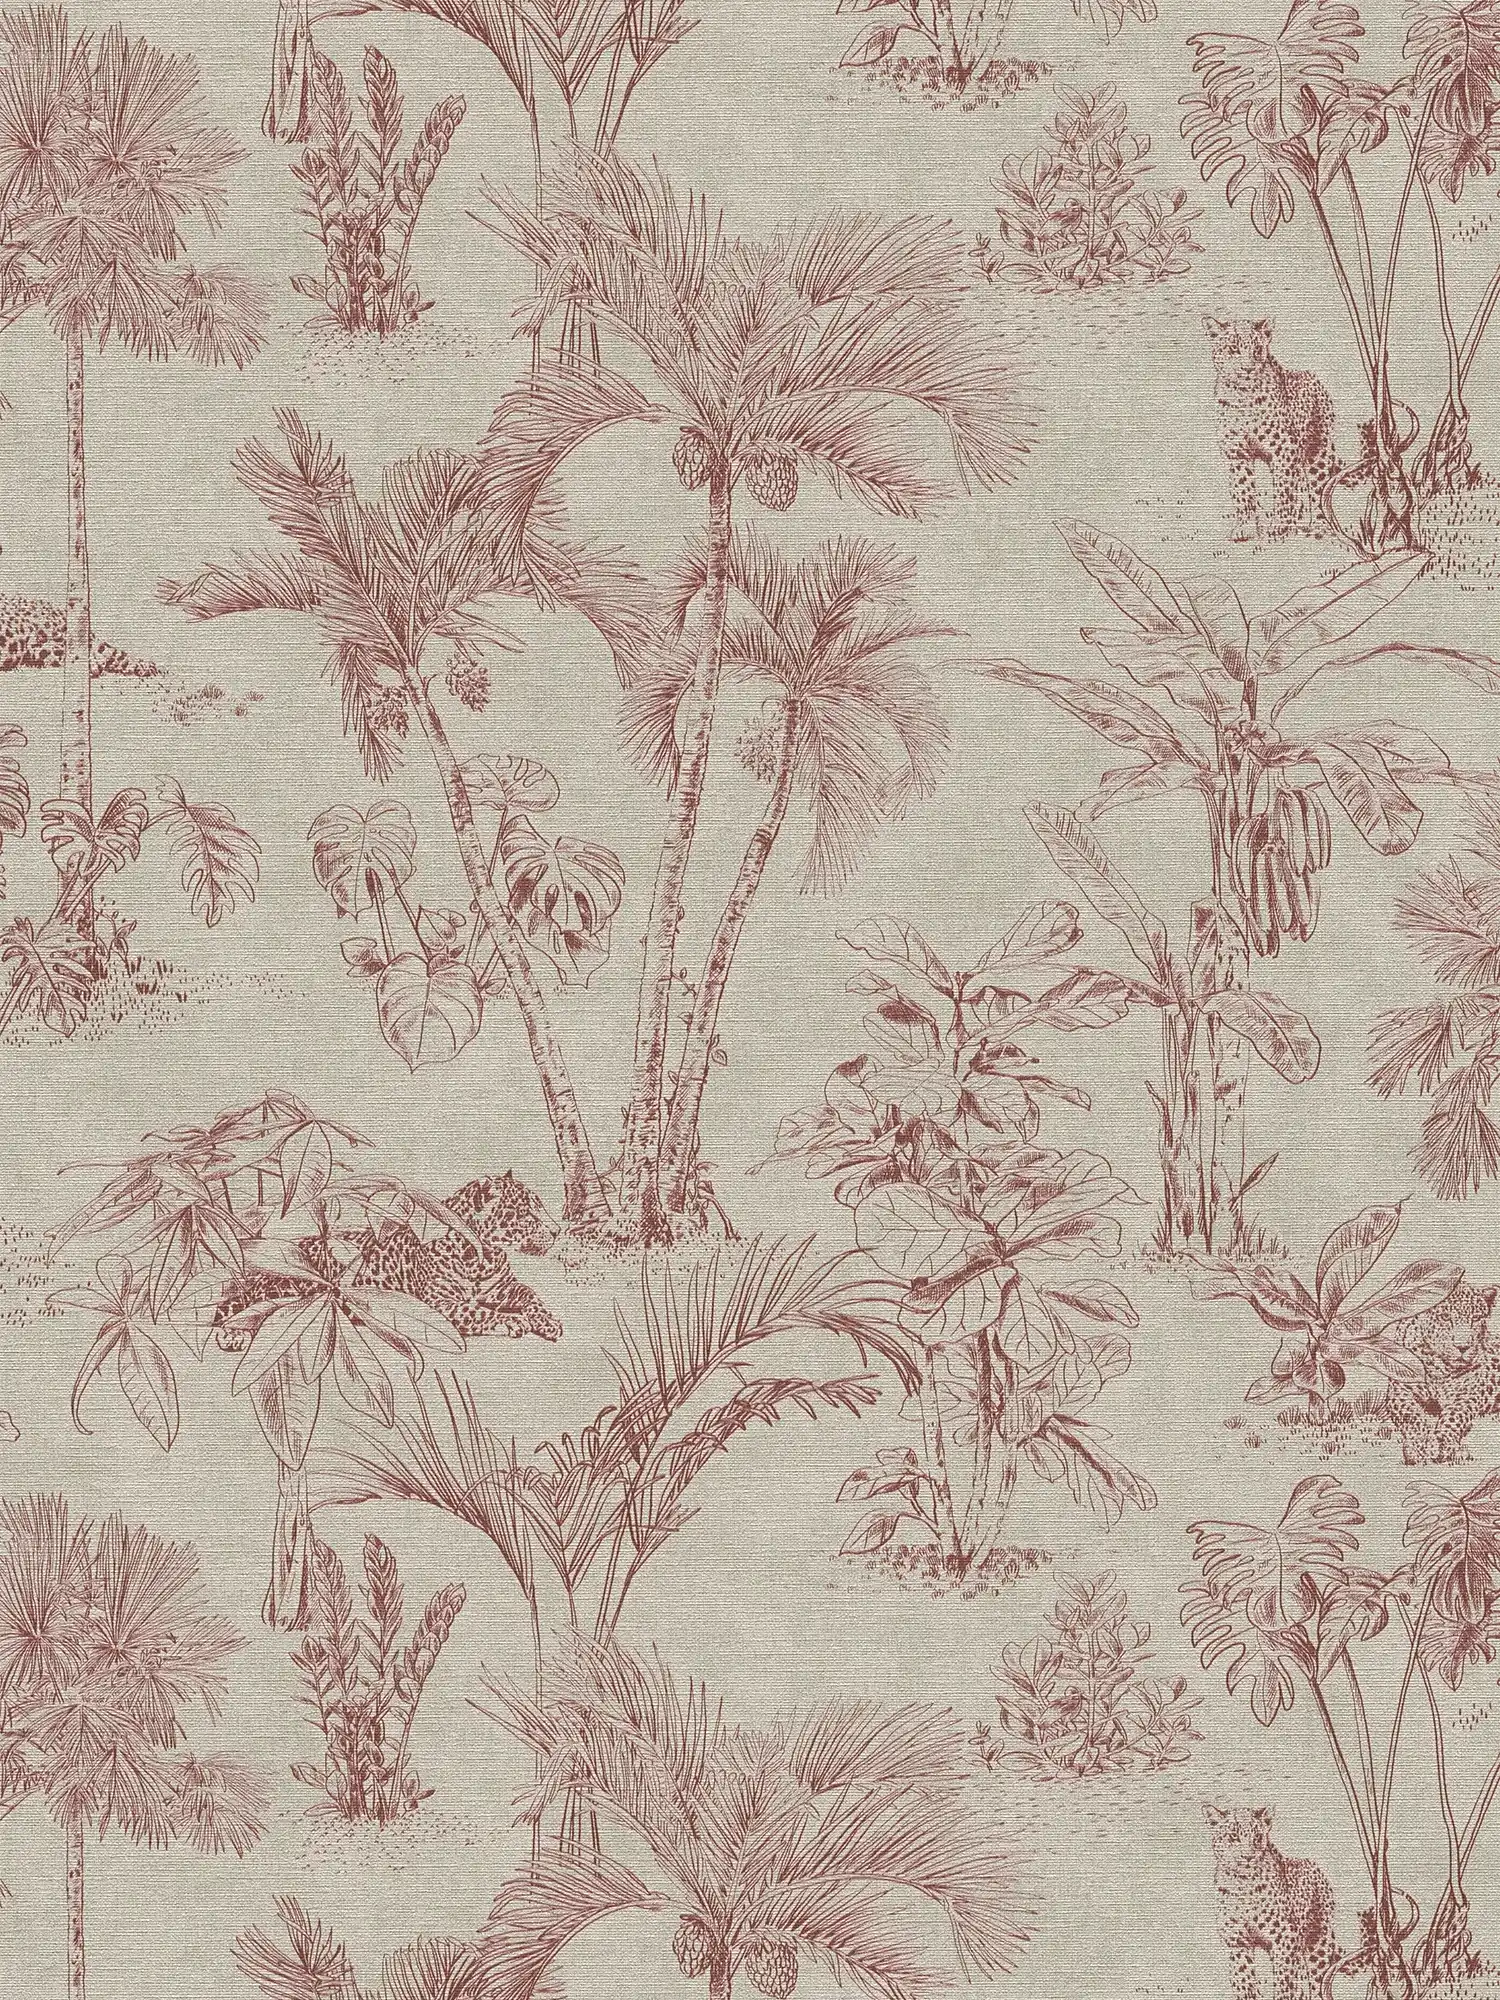 Wallpaper jungle pattern palm trees in colonial style - brown, red
